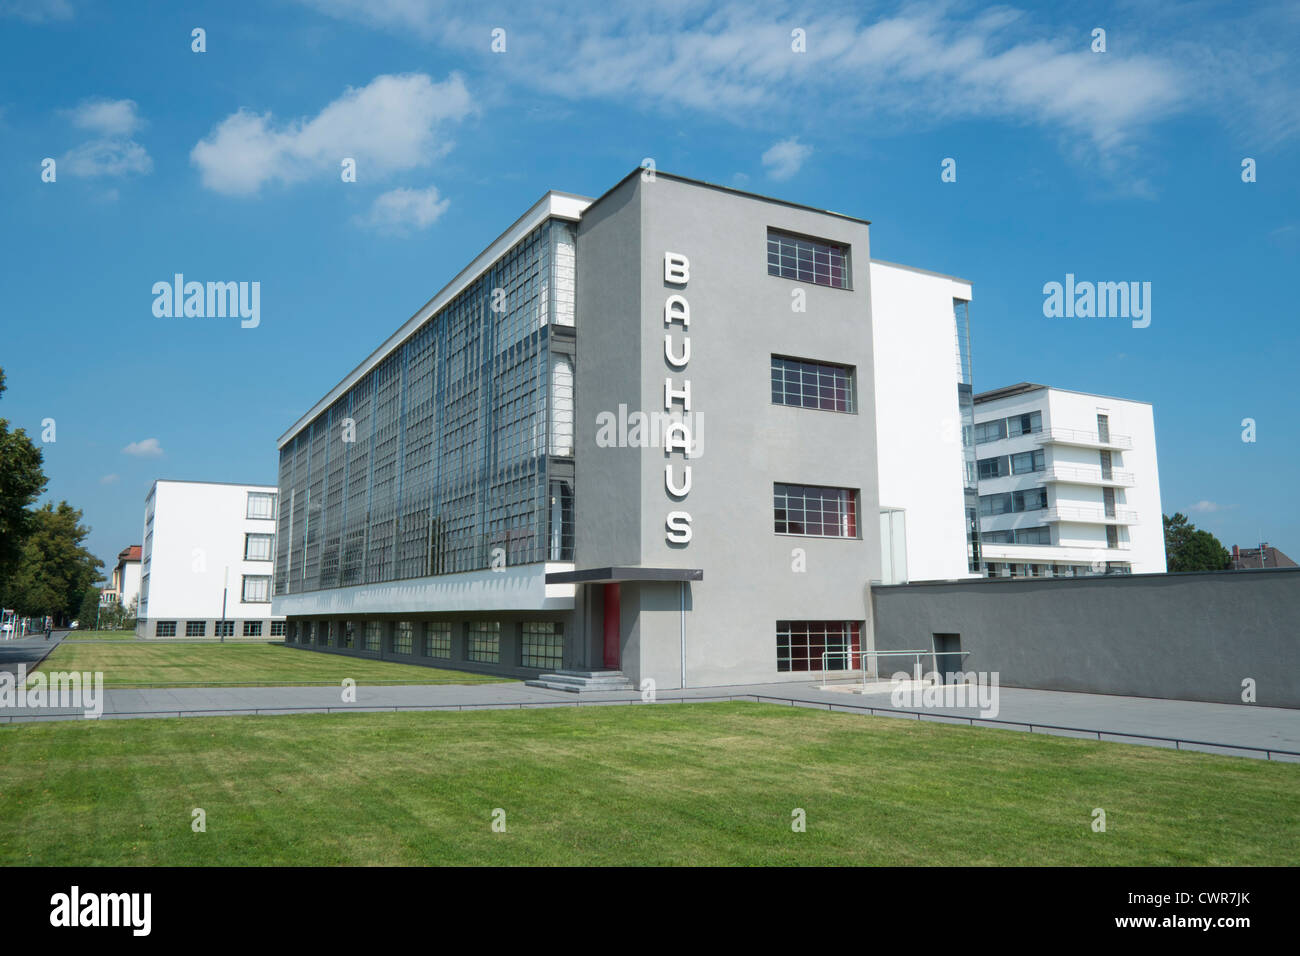 Bauhaus Building and architecture school designed by Walter Gropius in Dessau Germany Stock Photo